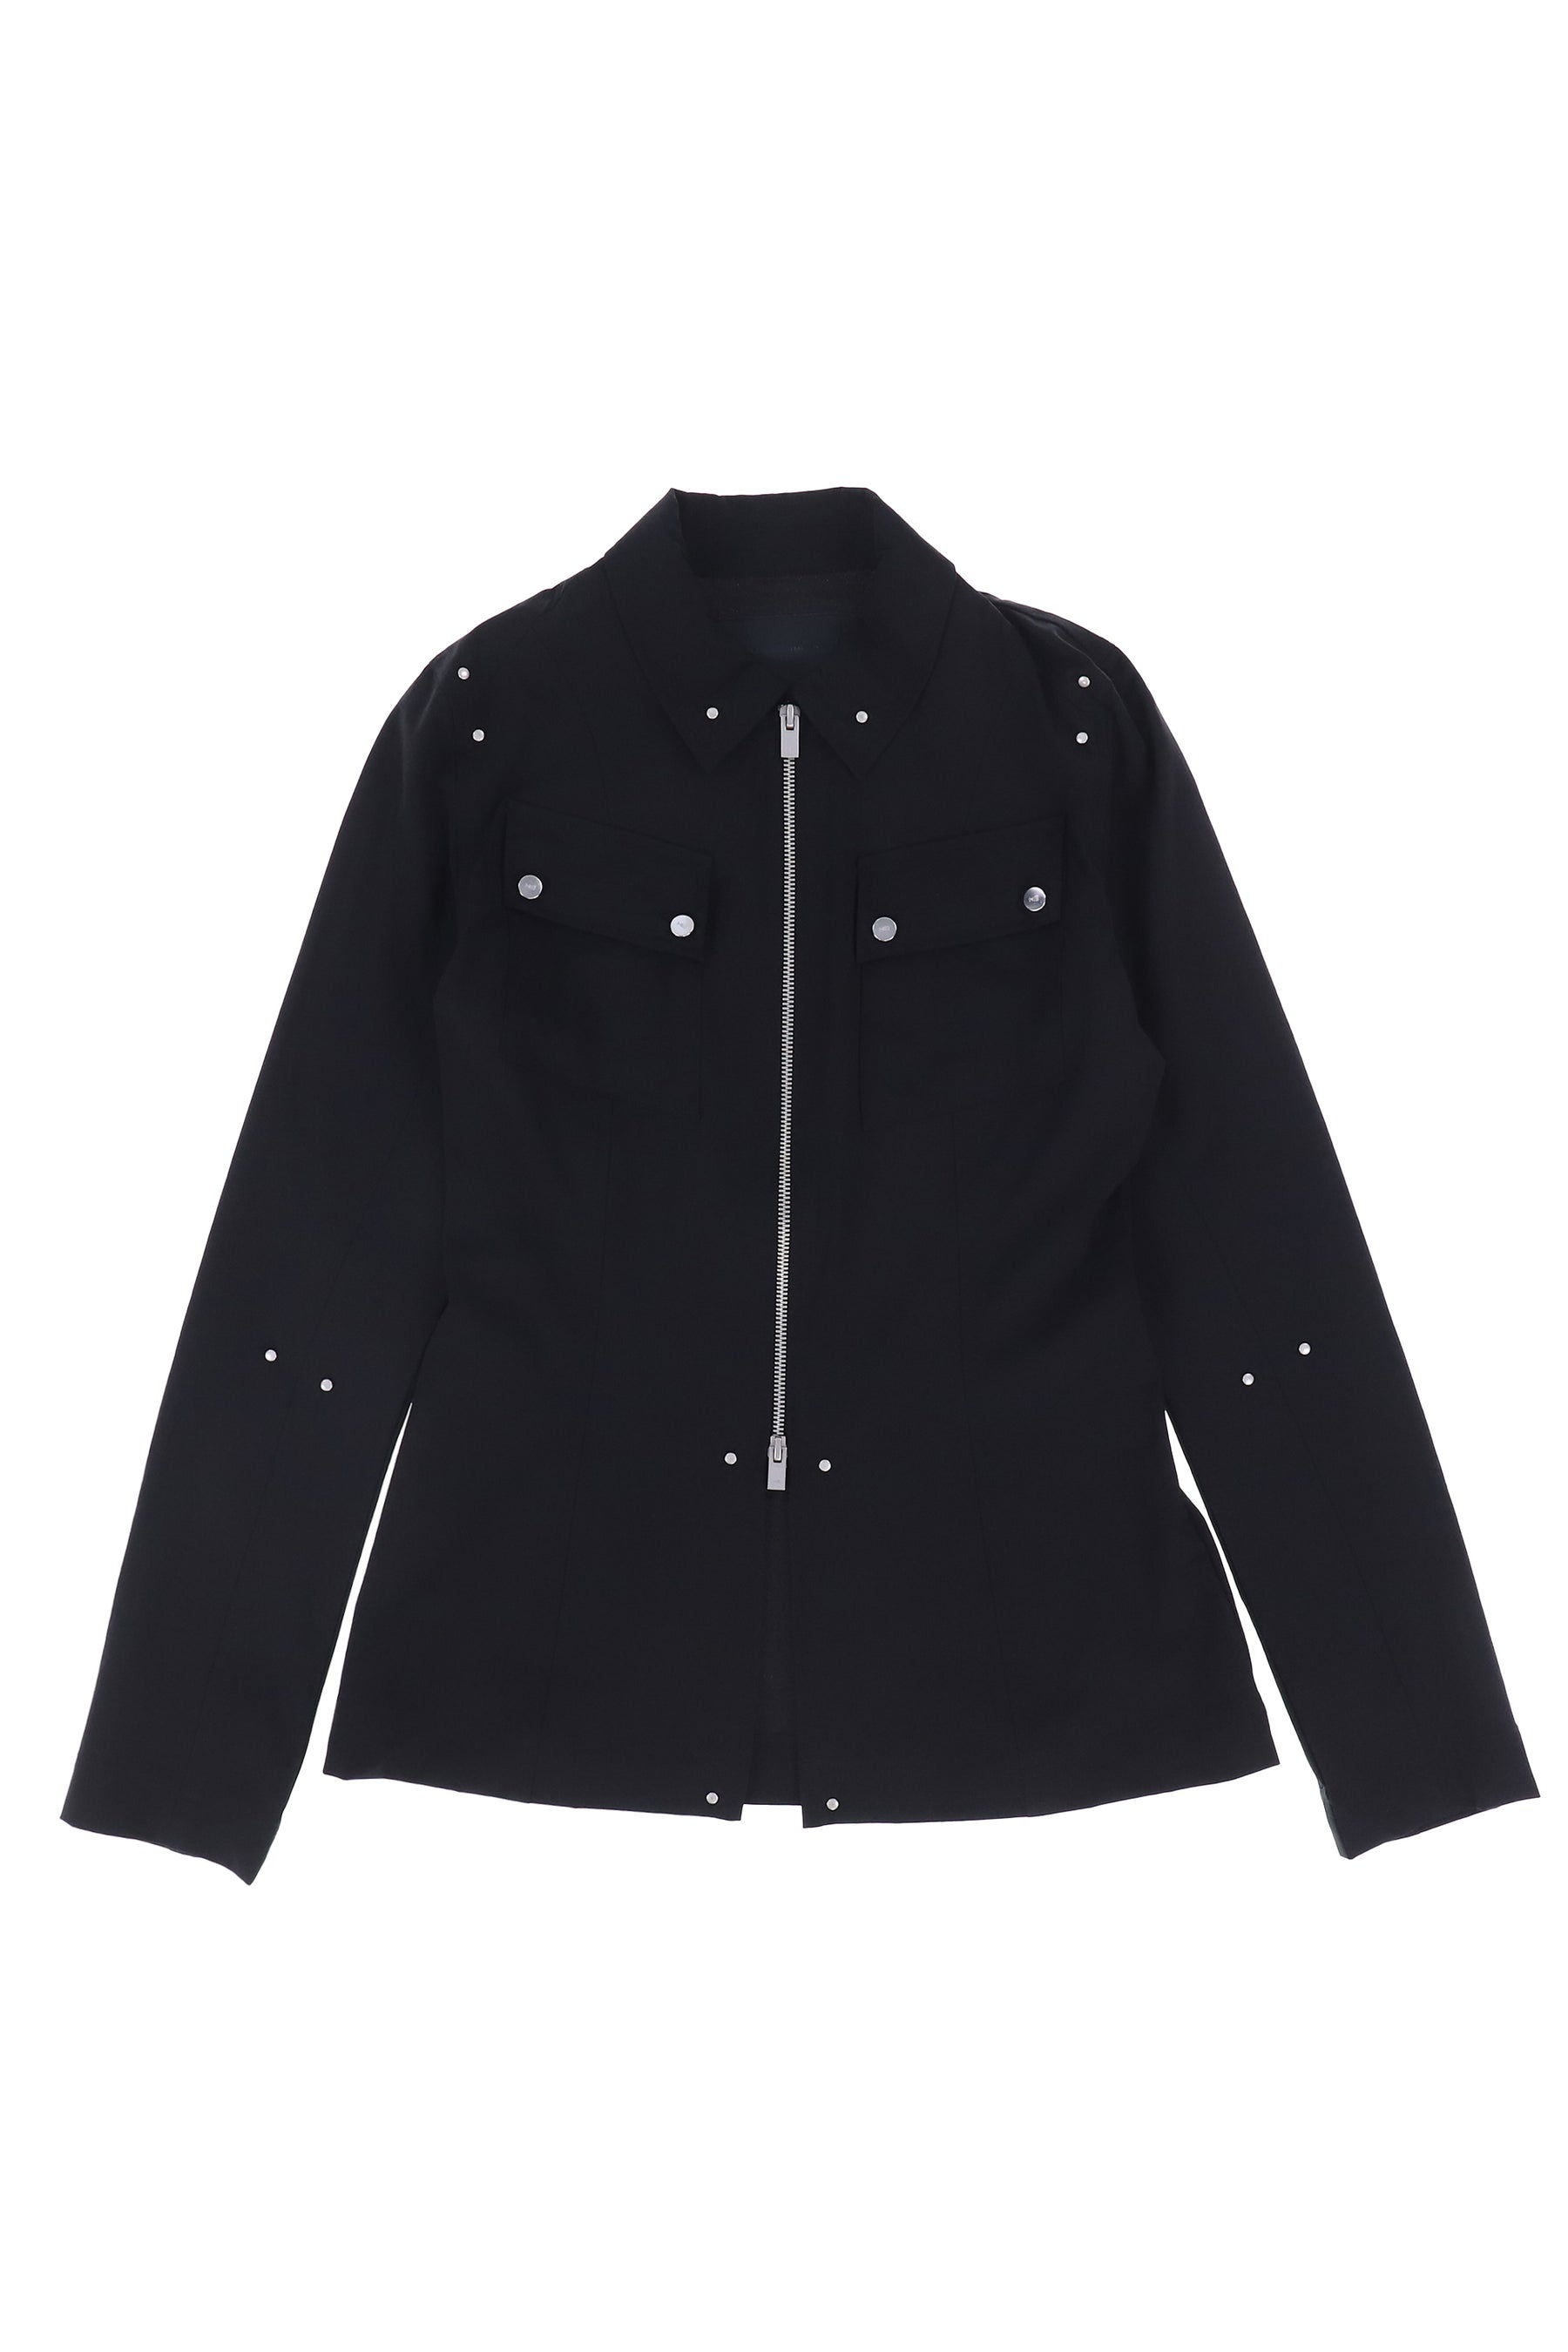 AFFINITY TECHNICAL TAILORED BLAZER / BLK - 1